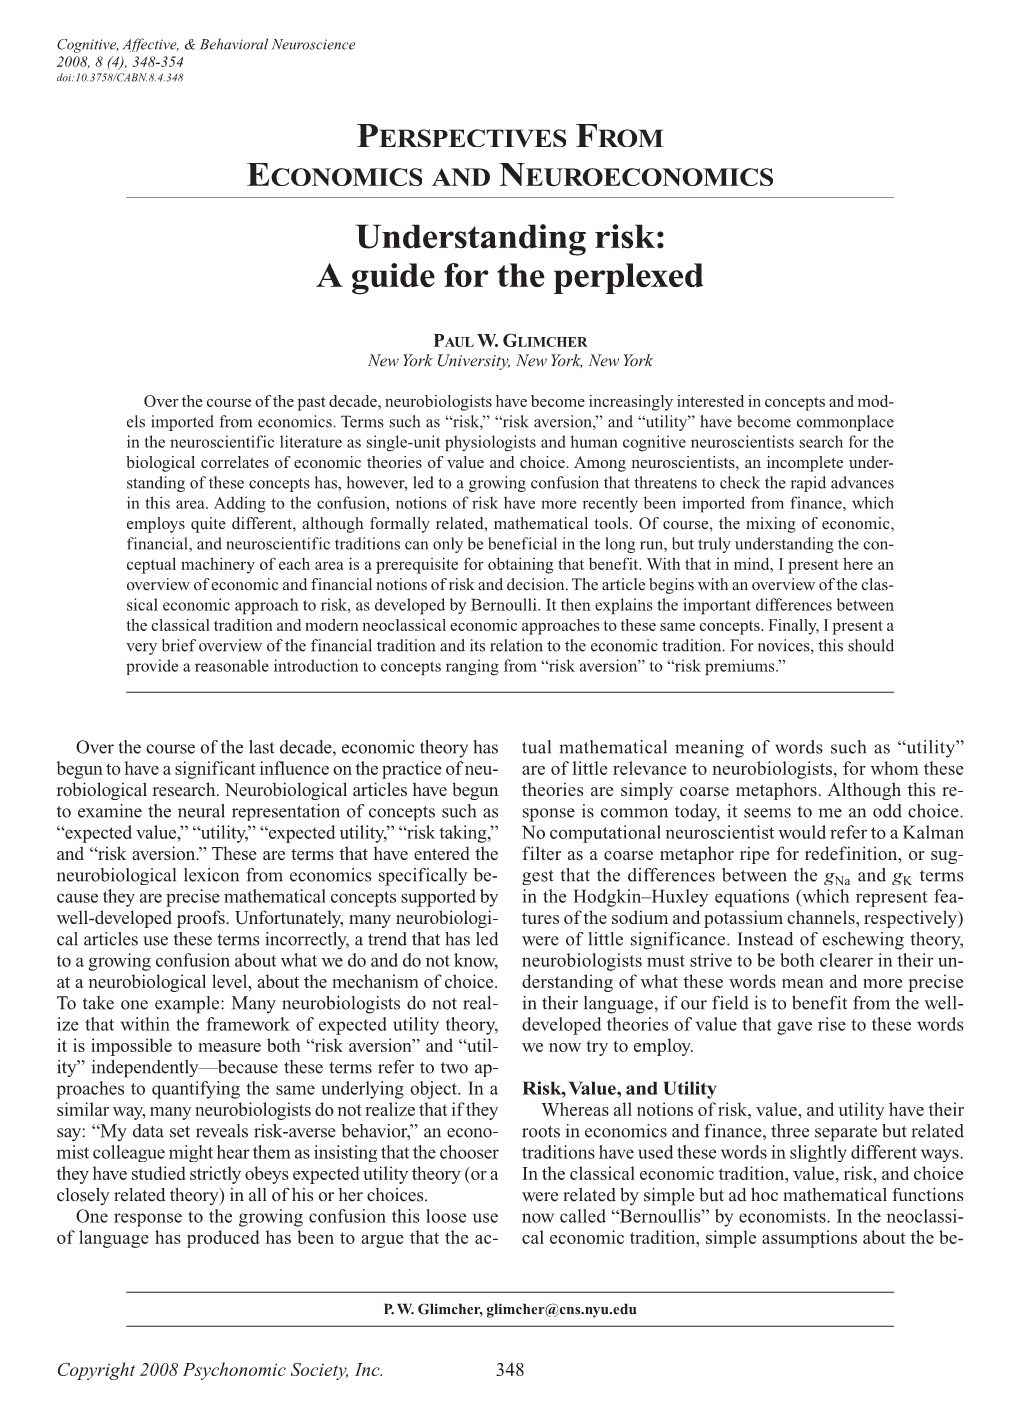 Understanding Risk: a Guide for the Perplexed